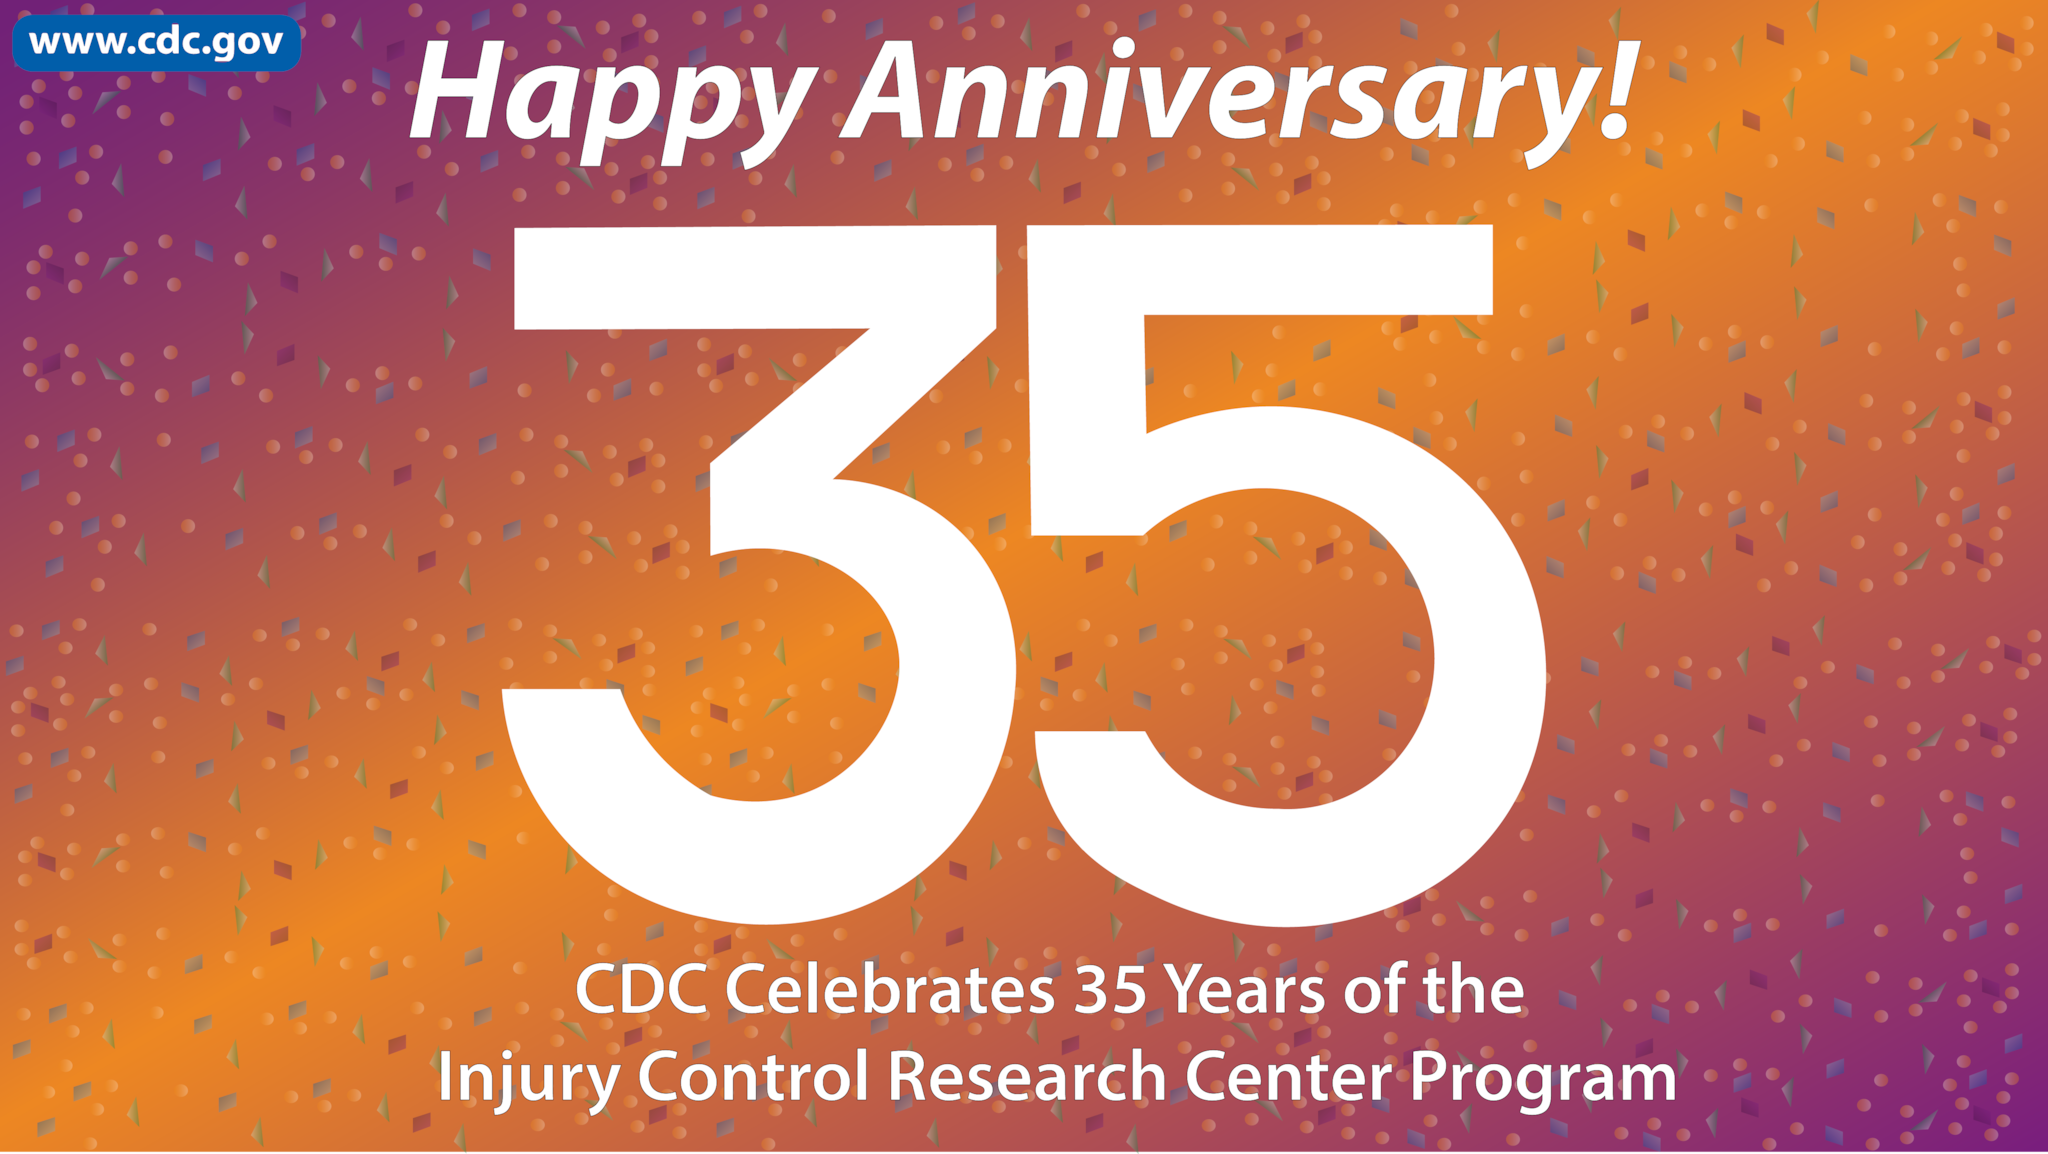 Happy Anniversary! 35. CDC Celebrates 35 Years of the Injury Control Research Center Program